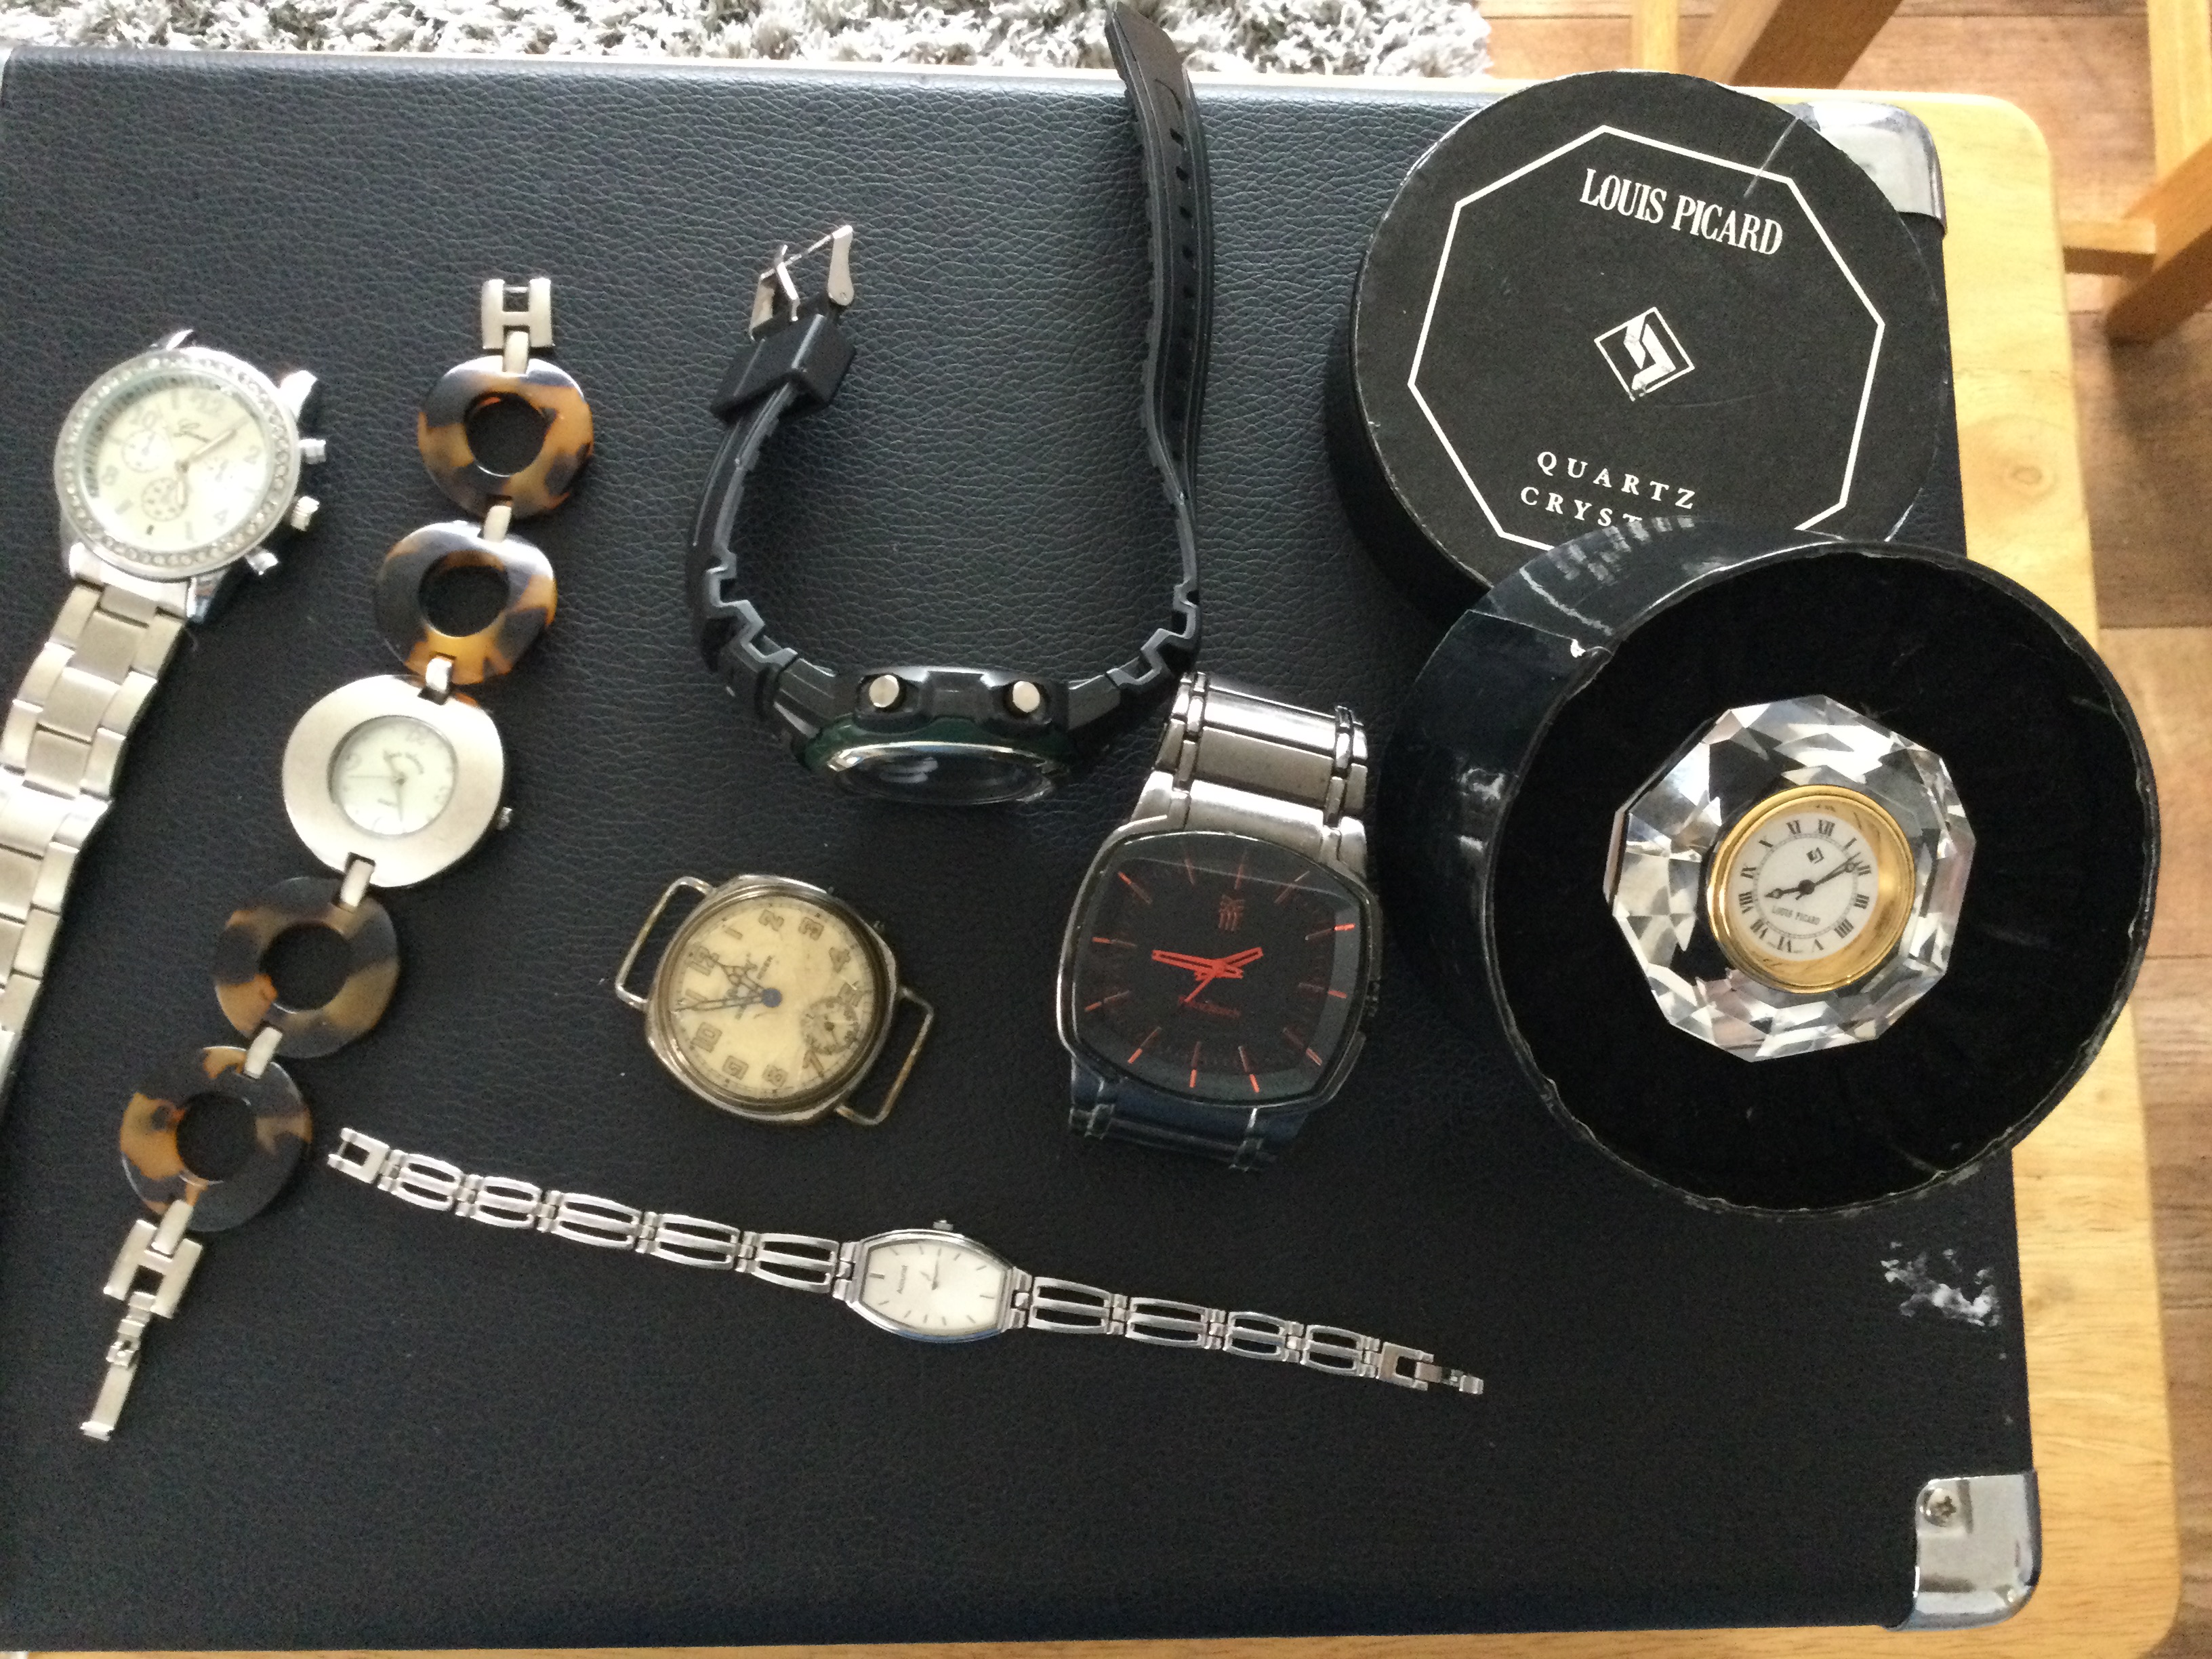 6 Mis-Fit Watches & Louis Picard Clock, Accurist, Rider Etc (GS 128) 6 Mis-fit Watches, - Image 2 of 4